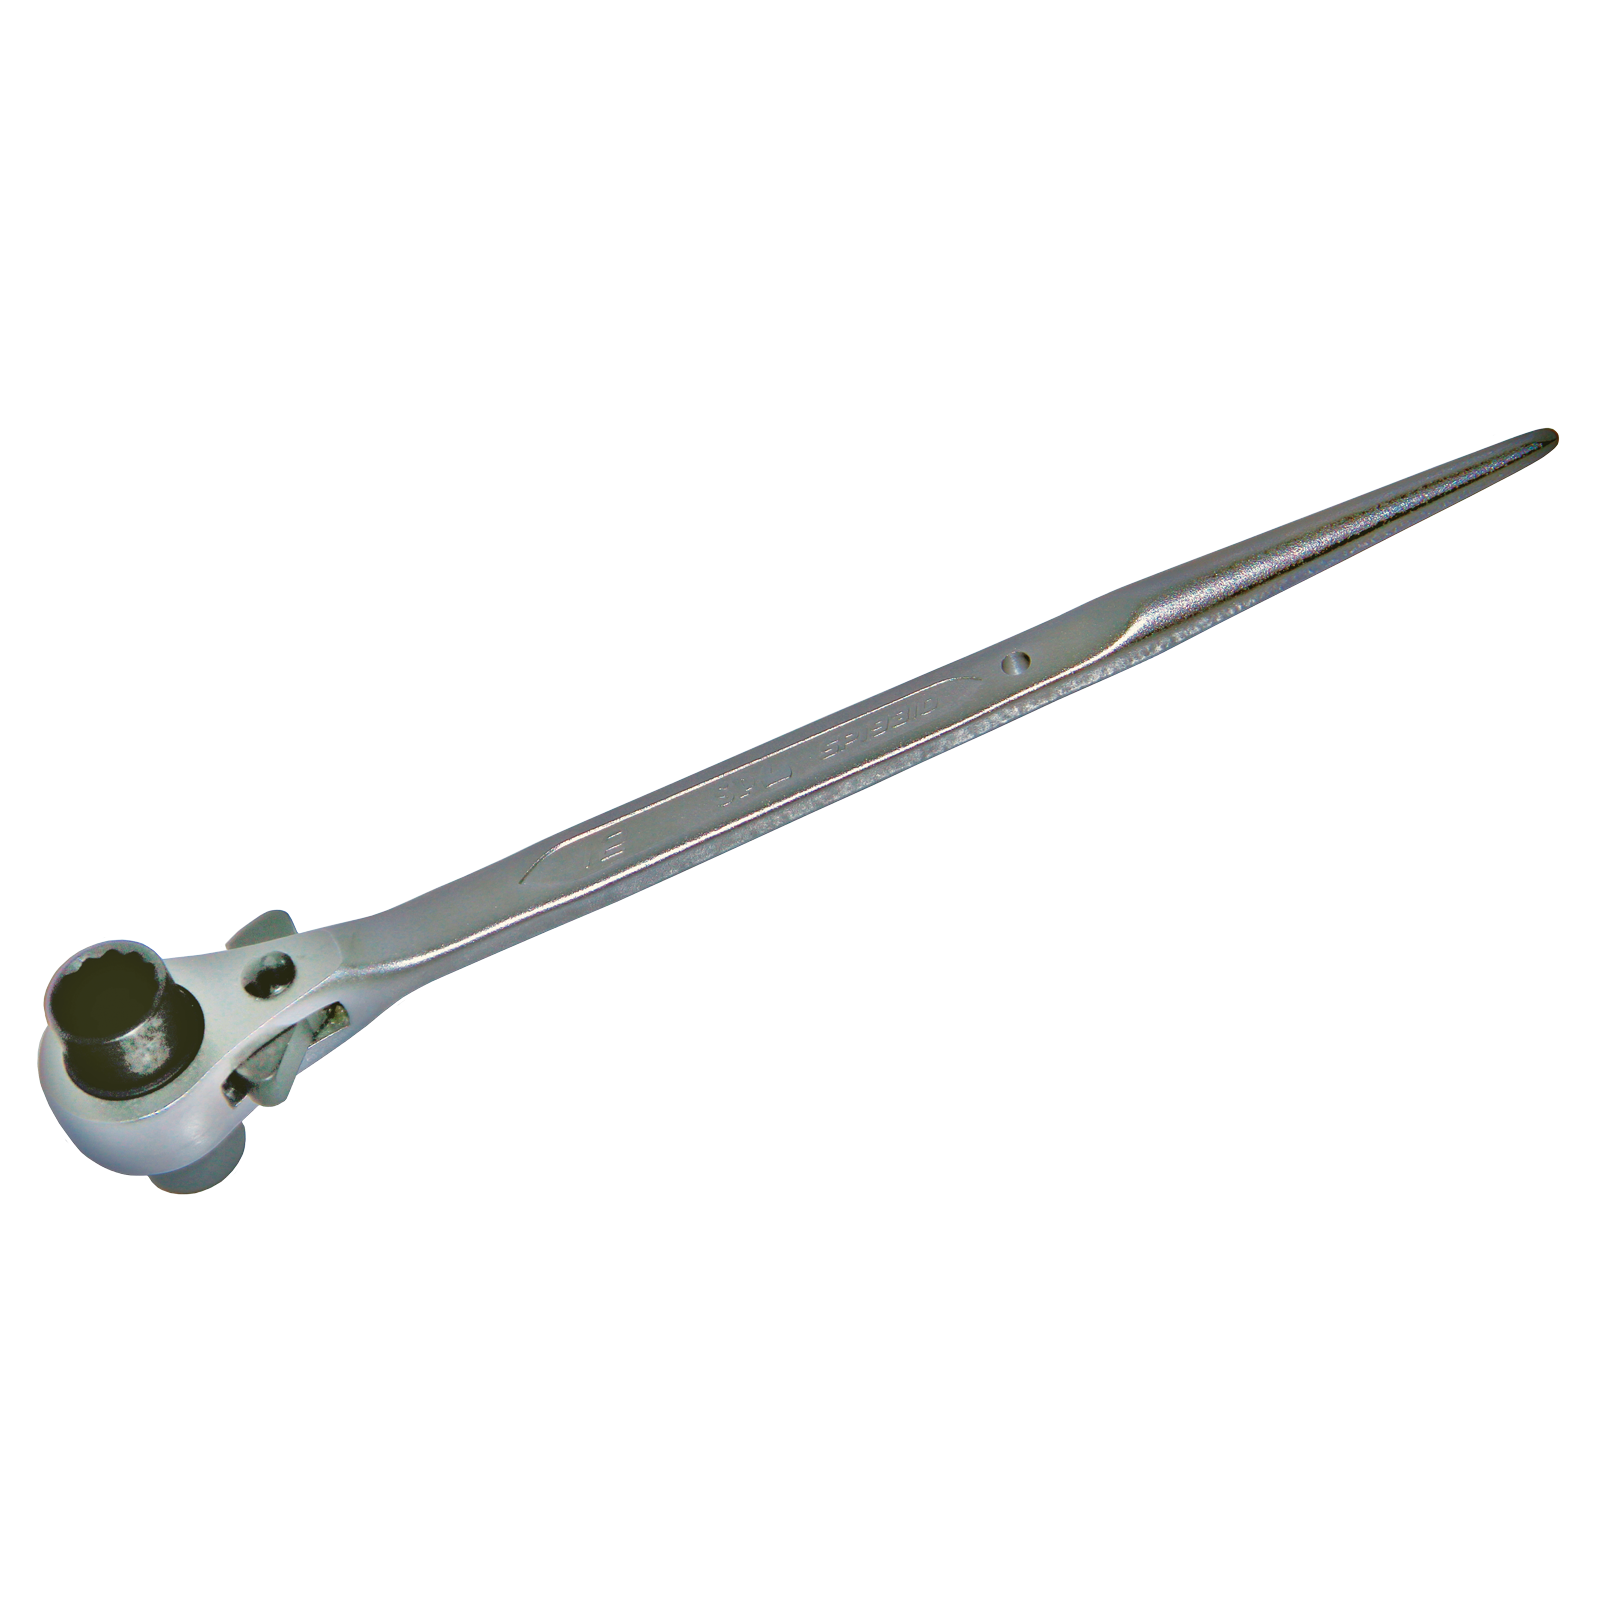 PODGER BAR  1 1/16″ X 430MM 21/32 HEAD THICKNESS OPEN END WRENCH STRUCTURAL WRENCH